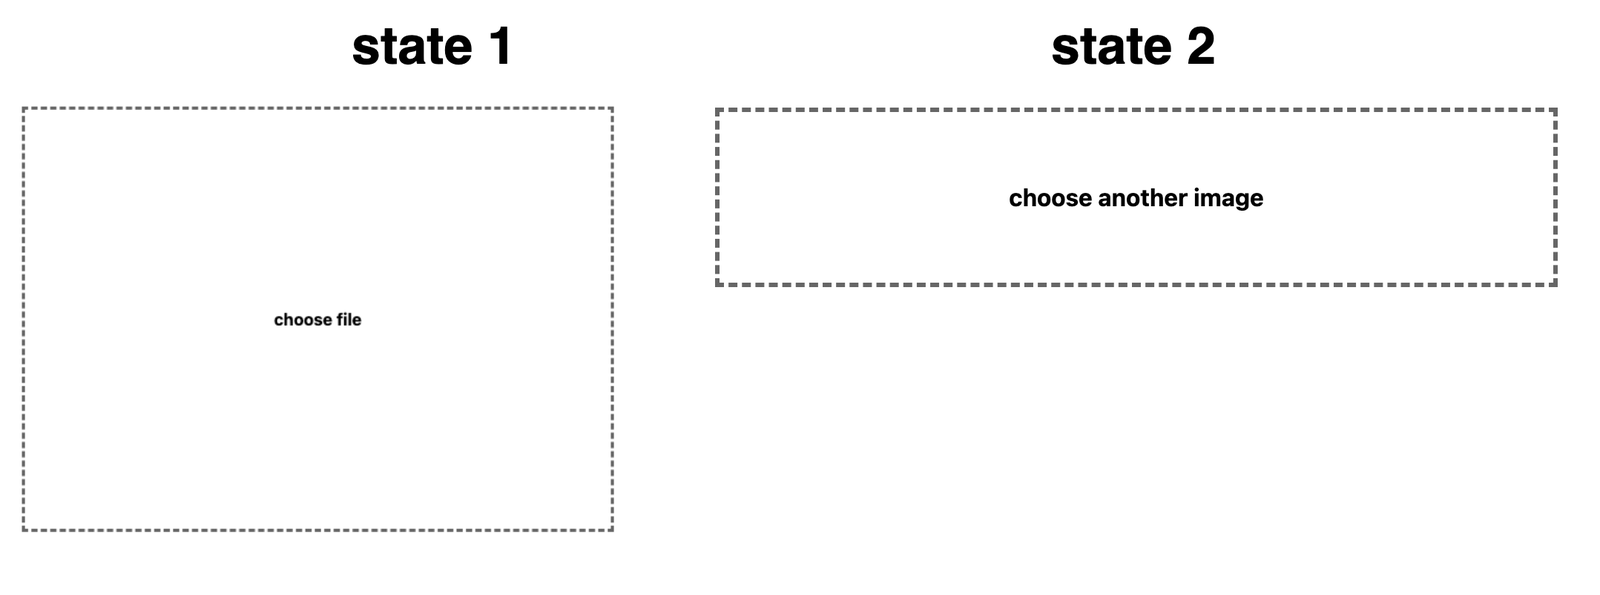 File picker component - state 1 choose file; state 2 choose another image